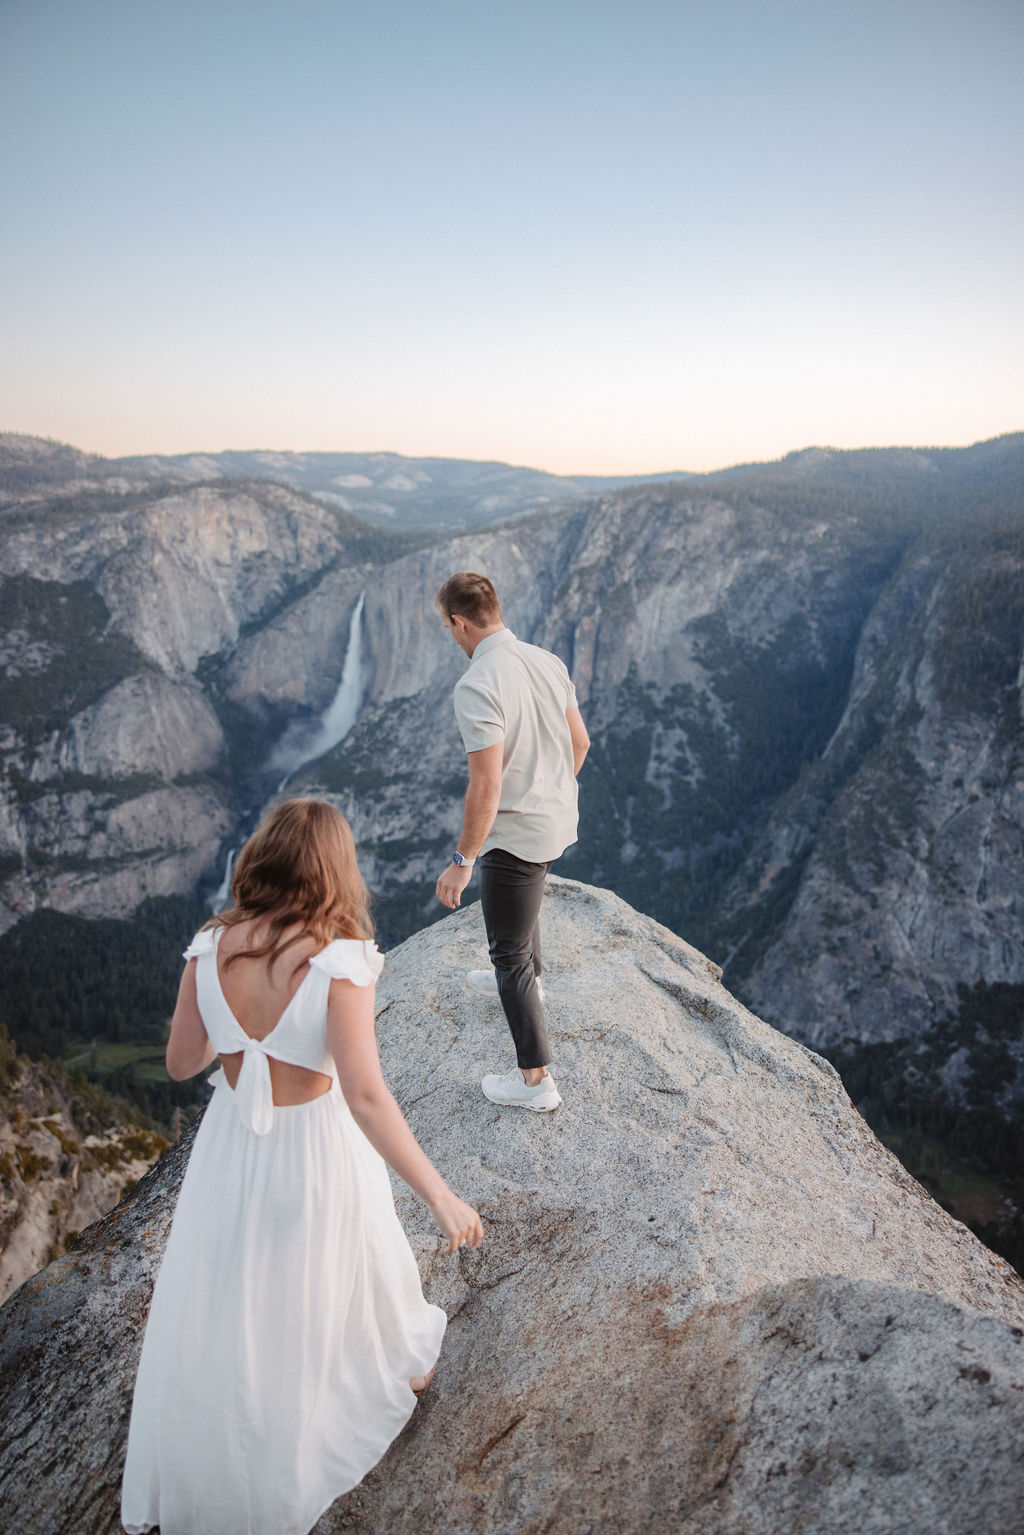 A couple stands on a rocky ledge overlooking a forested mountainous landscape, with the man embracing the woman from behind.